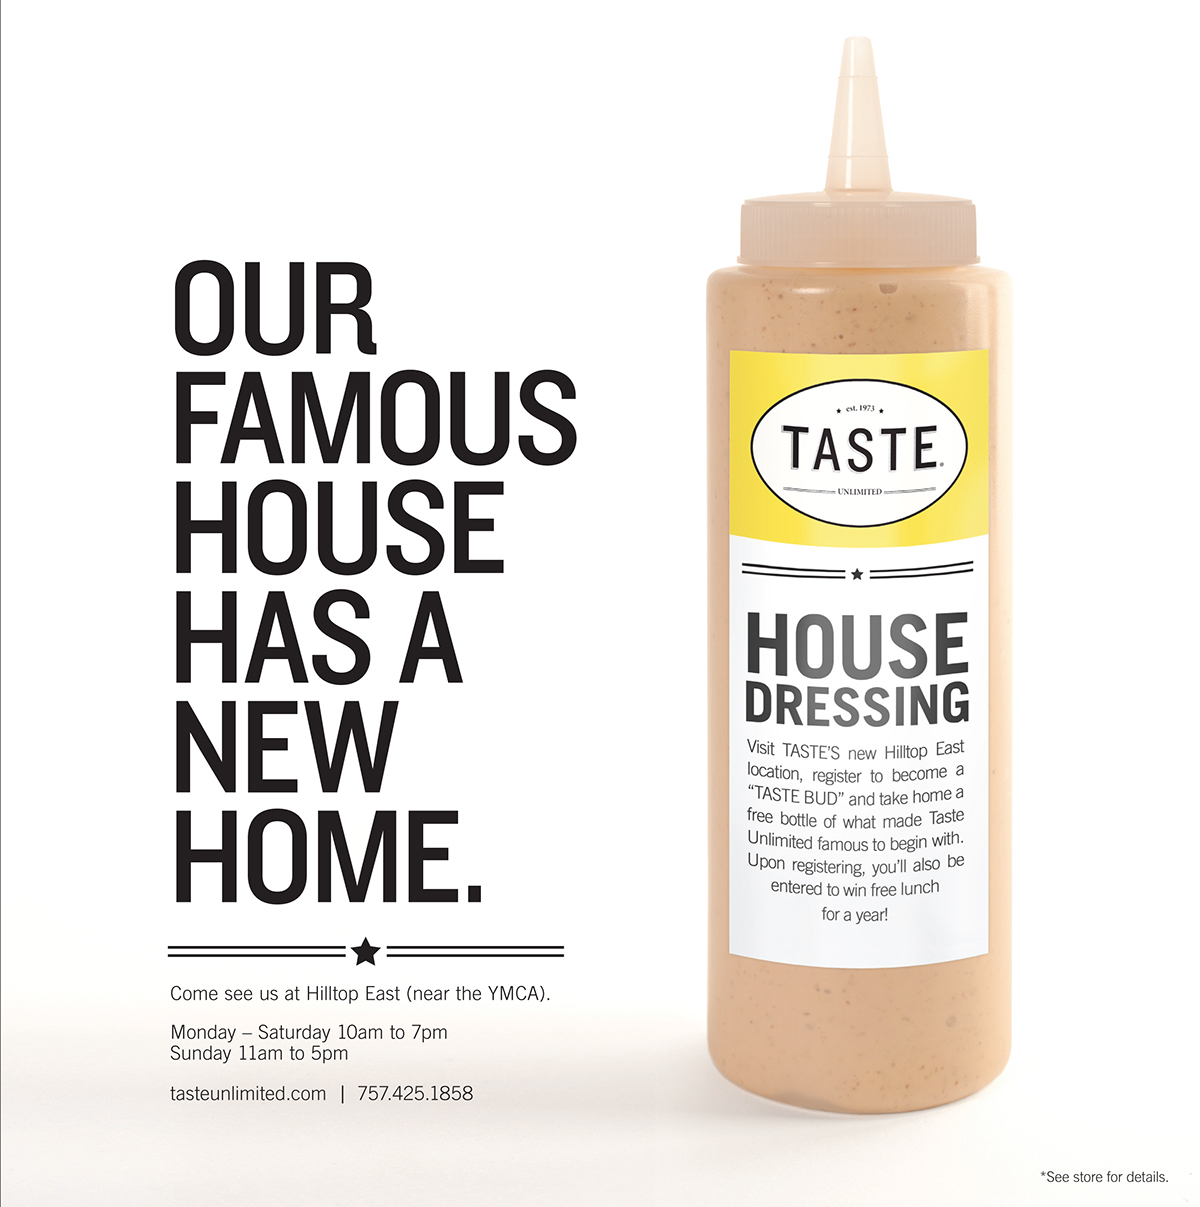 Taste Unlimited Newspaper Ad full page house dressing